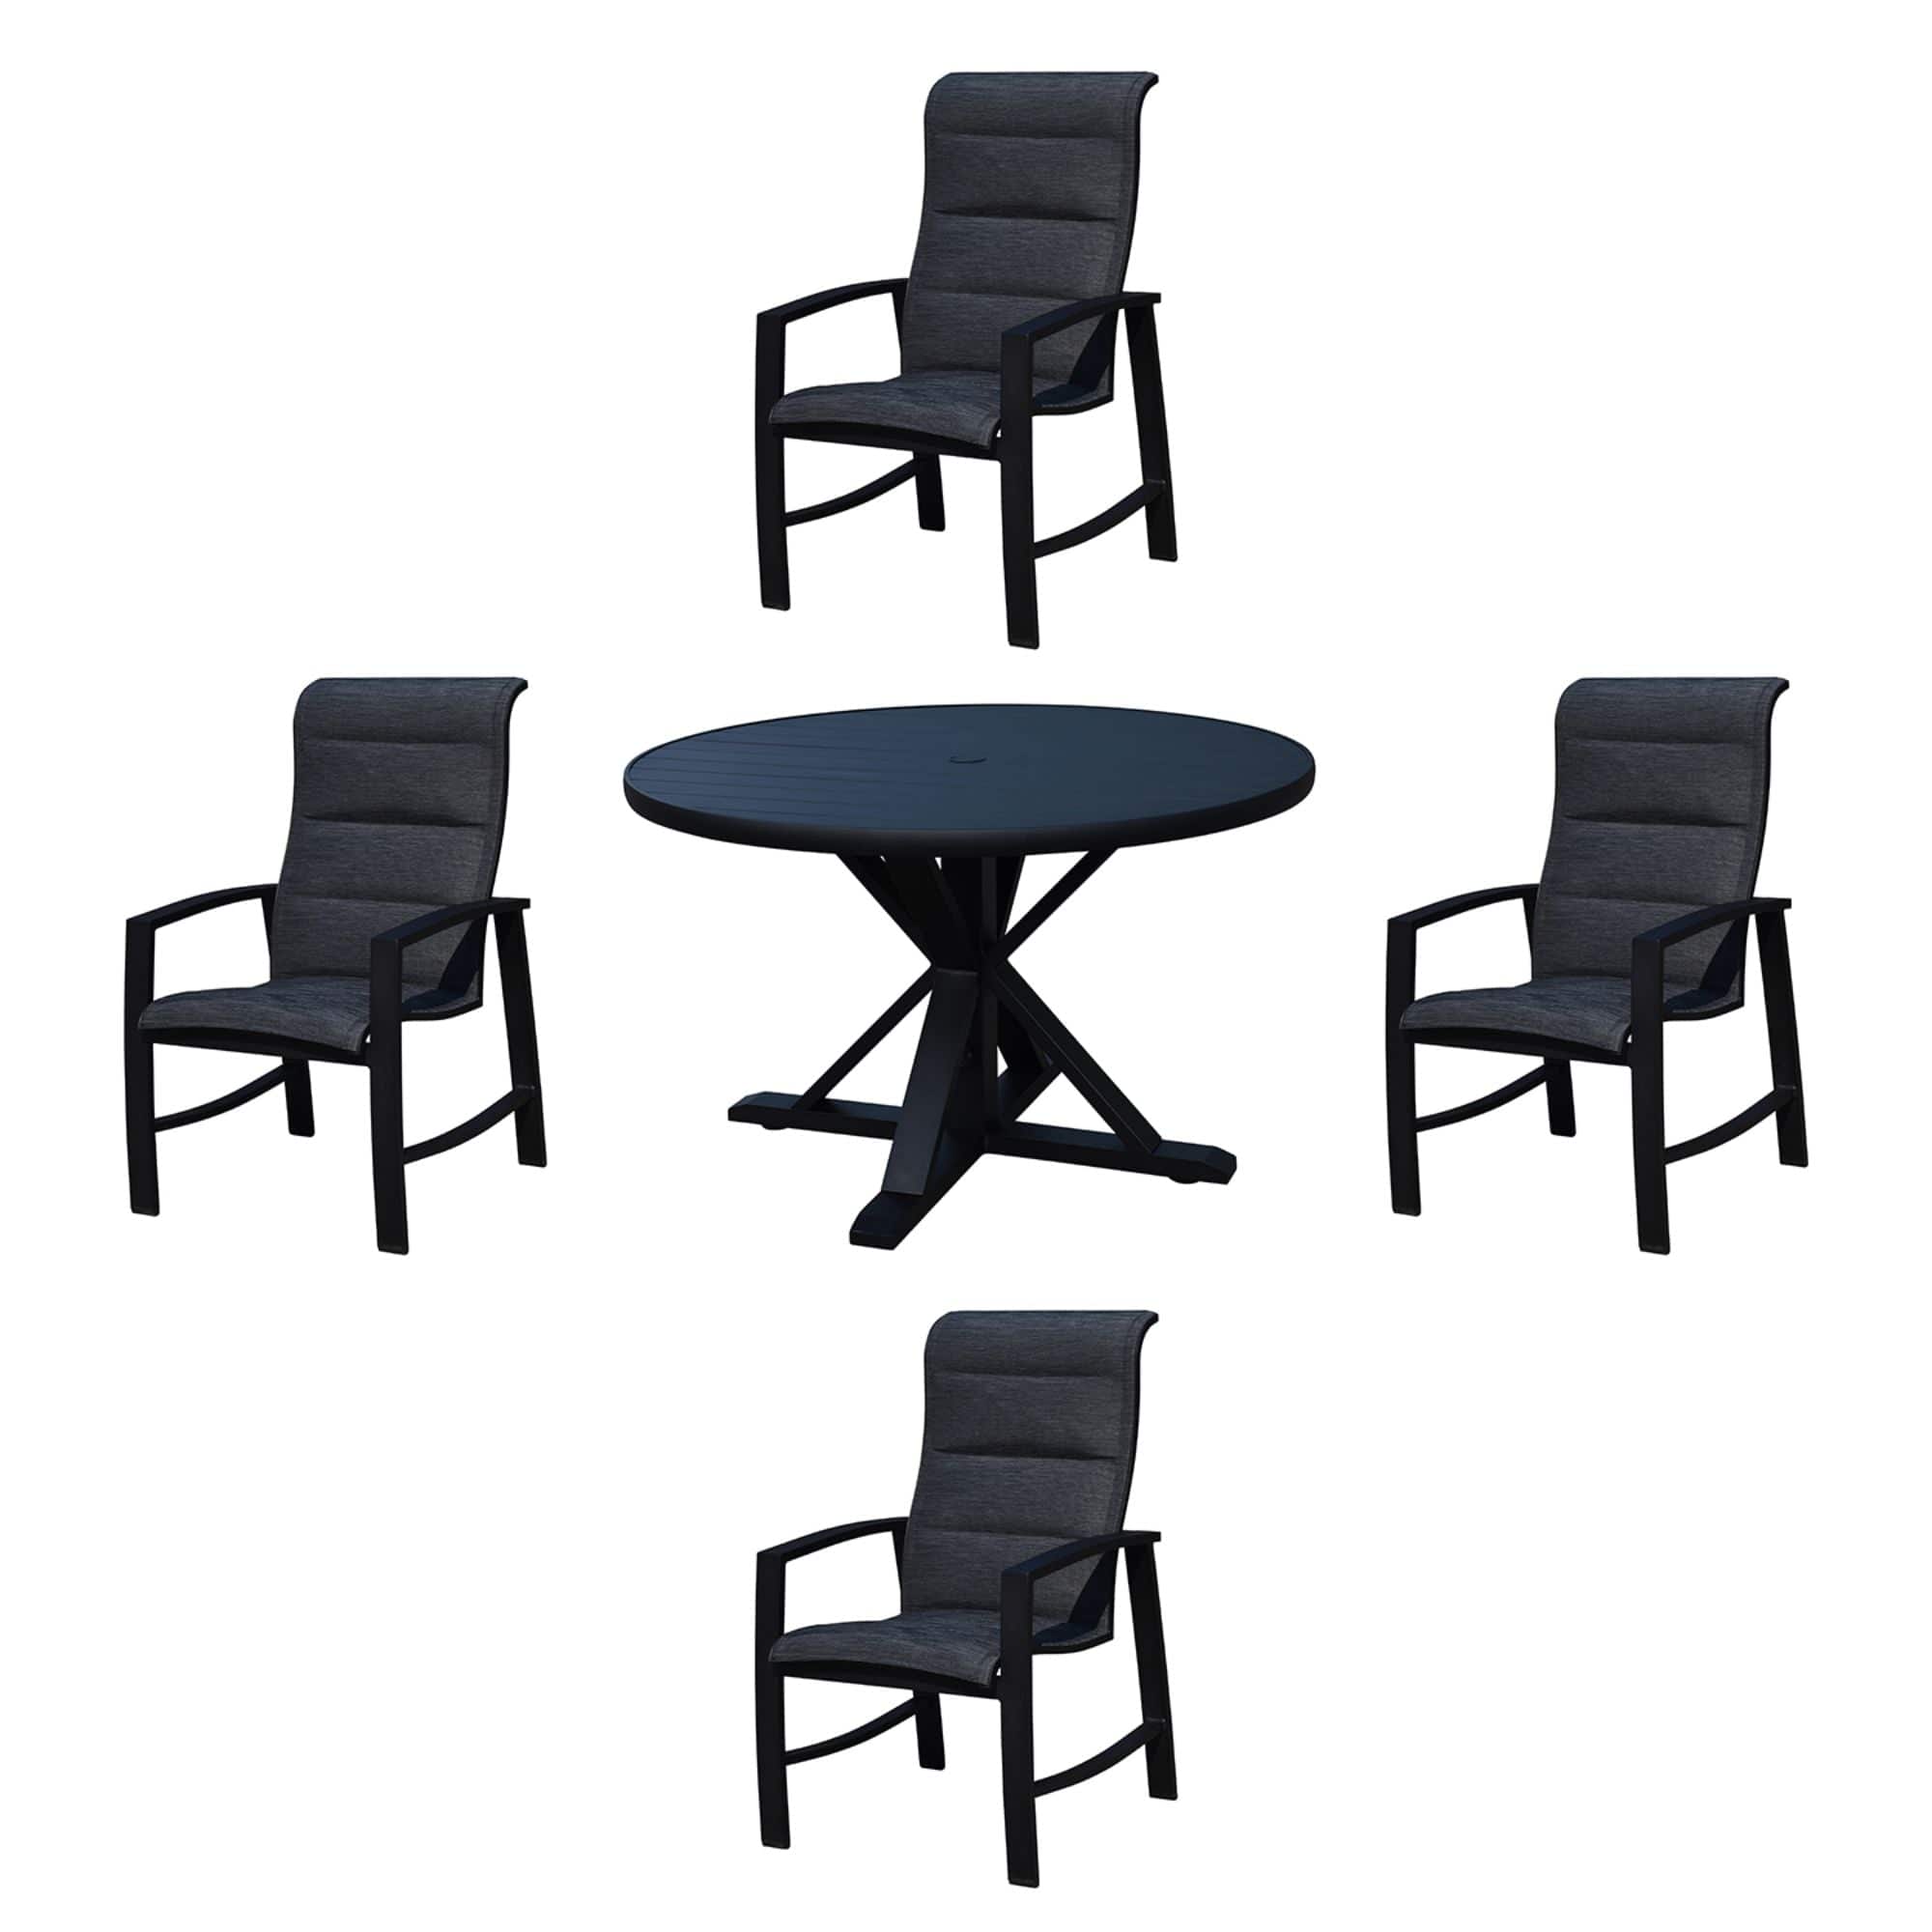 Courtyard Casual Outdoor Dining Set Courtyard Casual -  Santorini 5 Piece 48" Round Table with 4 Padded Sling Chairs Dining Set | 5345